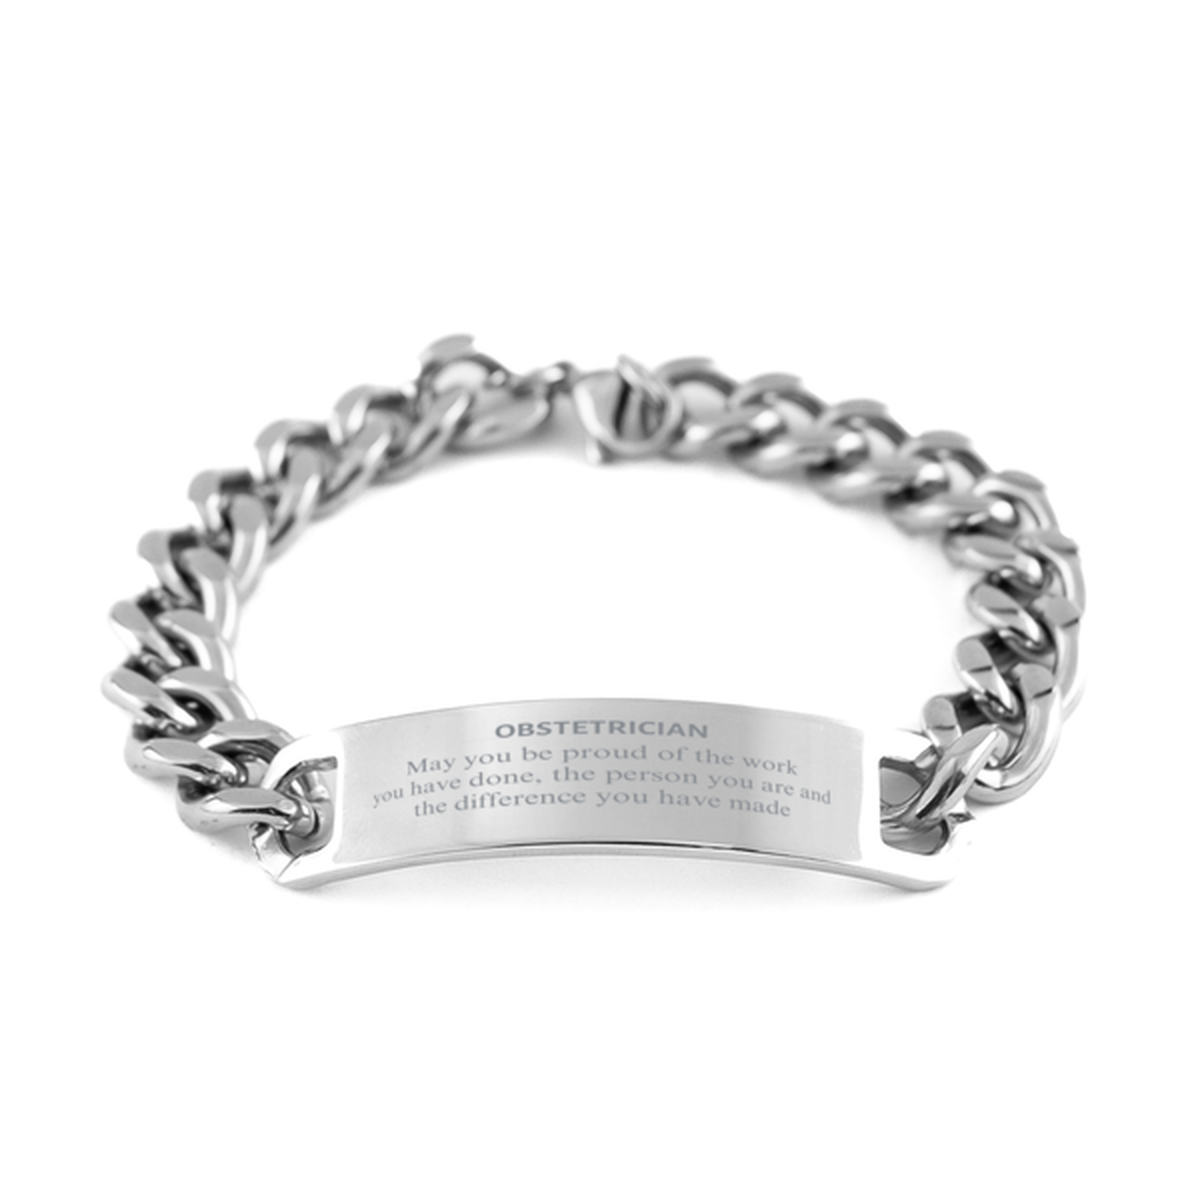 Obstetrician May you be proud of the work you have done, Retirement Obstetrician Cuban Chain Stainless Steel Bracelet for Colleague Appreciation Gifts Amazing for Obstetrician